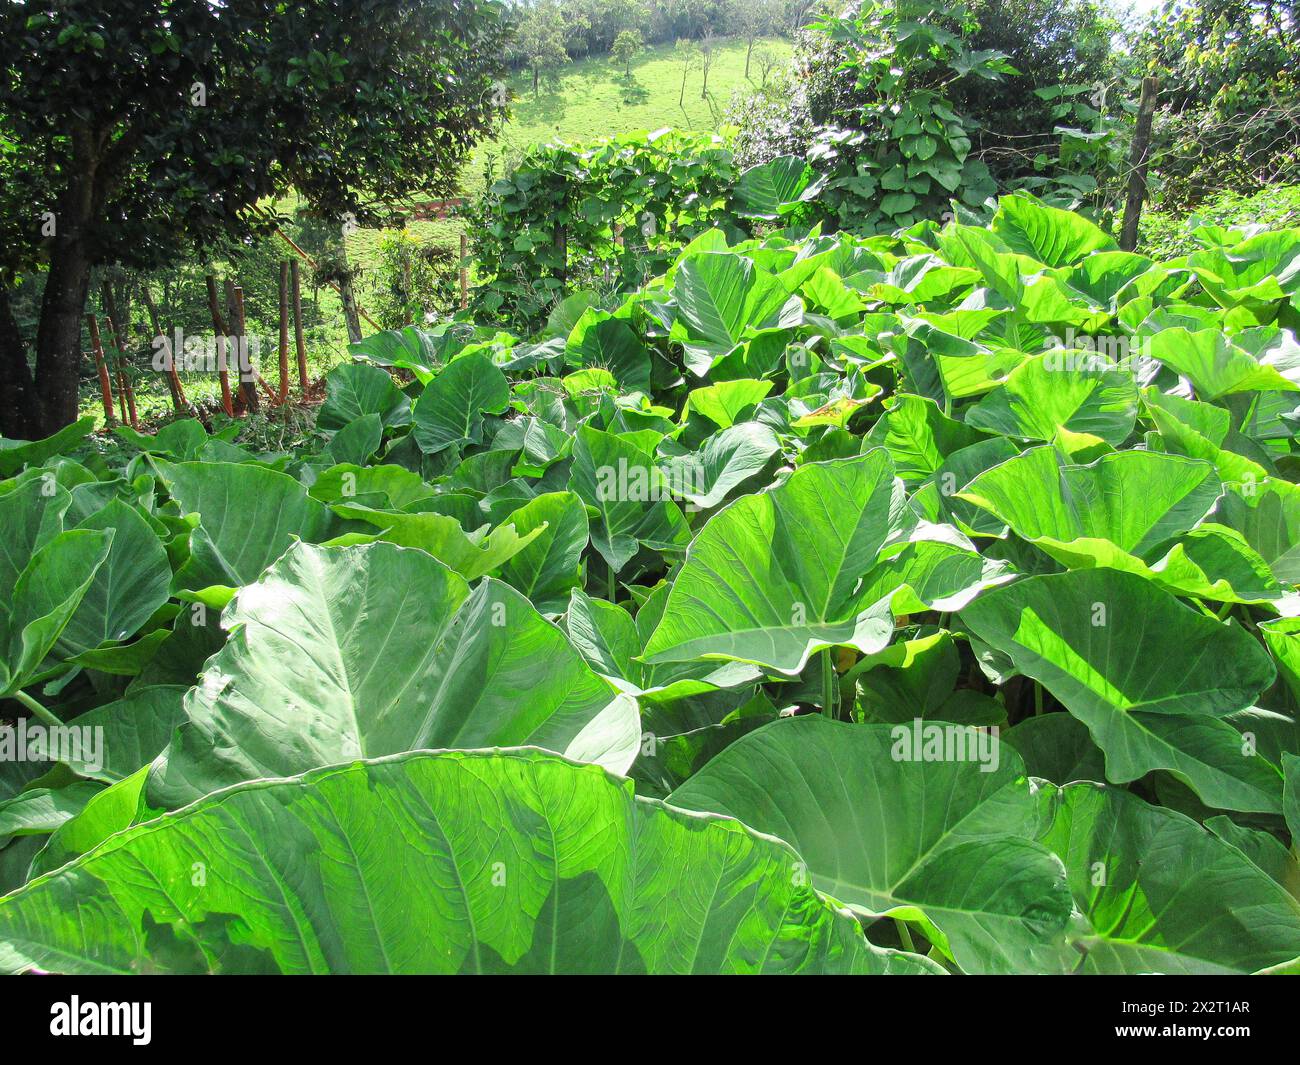 Sunlight reflecting on the vegetable garden and on the taioba leaves, a vegetable with large, nutritious and tasty green leaves. Trees in the backgrou Stock Photo